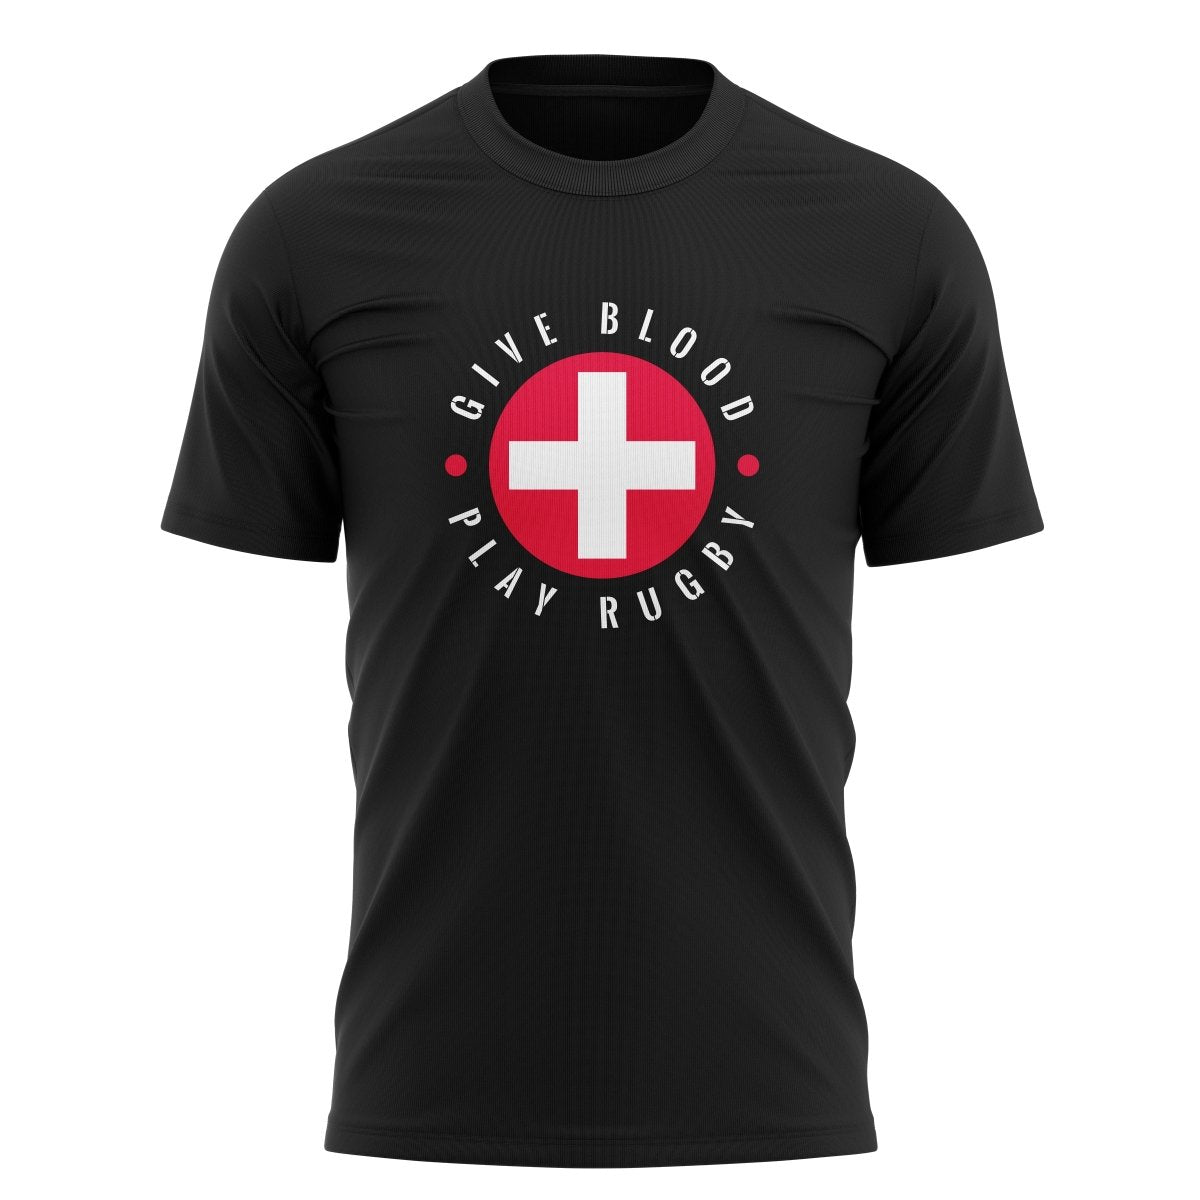 Give Blood PLAy Rugby Graphic Tee - www.therugbyshop.com www.therugbyshop.com MEN&#39;S / BLACK / S XIX Brands TEES Give Blood PLAy Rugby Graphic Tee